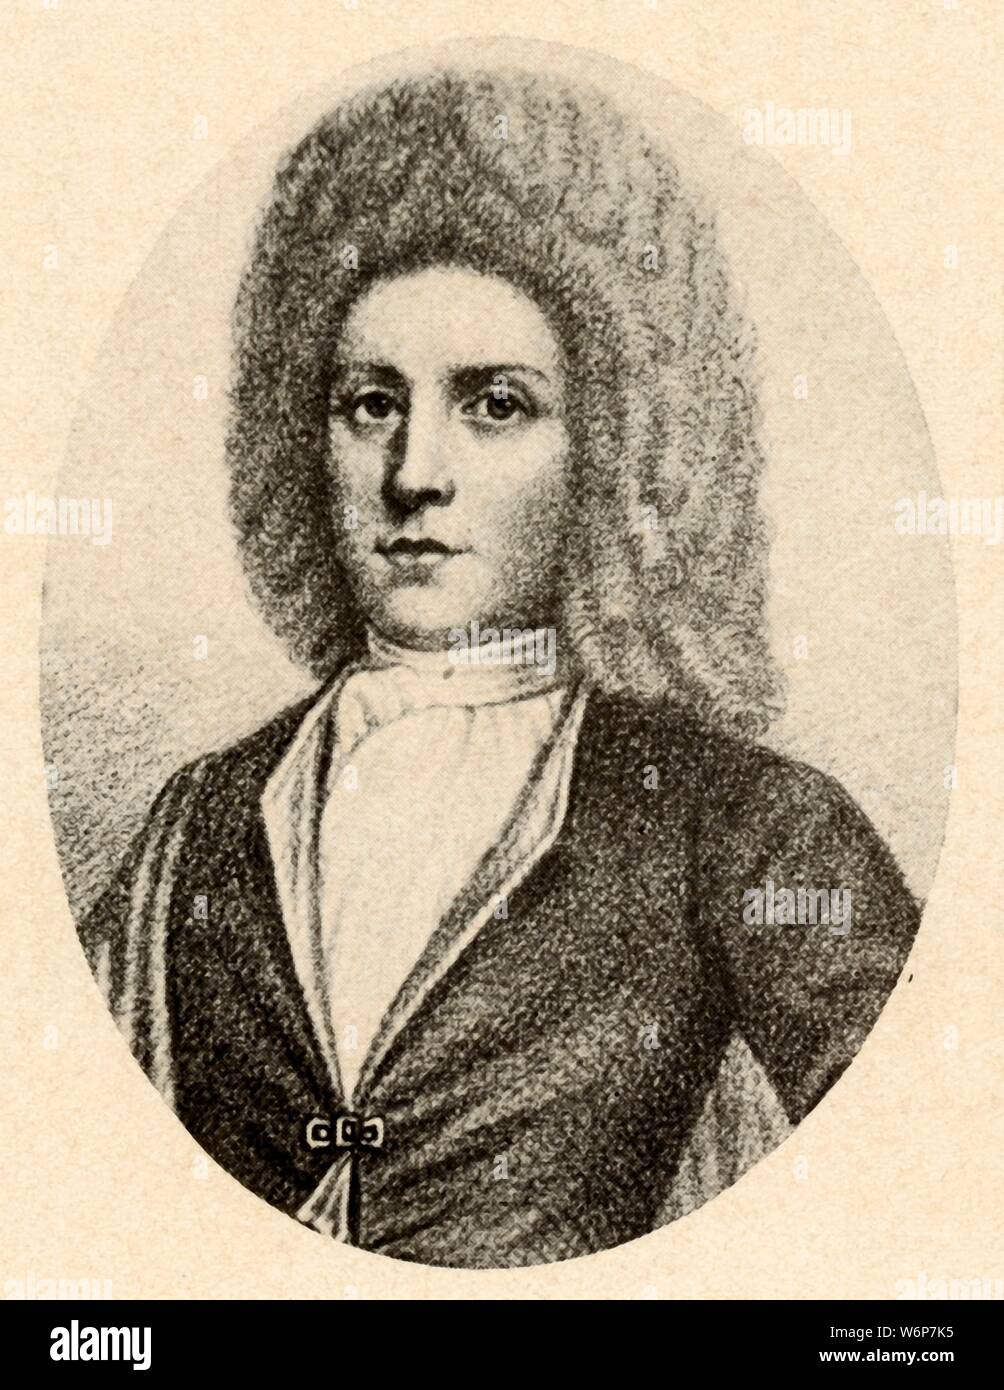 'Portrait of a boy in periwig in the Massachusetts Colony, end of the reign of Charles II', c1680s, (1937). From &quot;History of American Costume - Book One 1607-1800&quot;, by Elisabeth McClellan. [Tudor Publishing Company, New York, 1937] Stock Photo